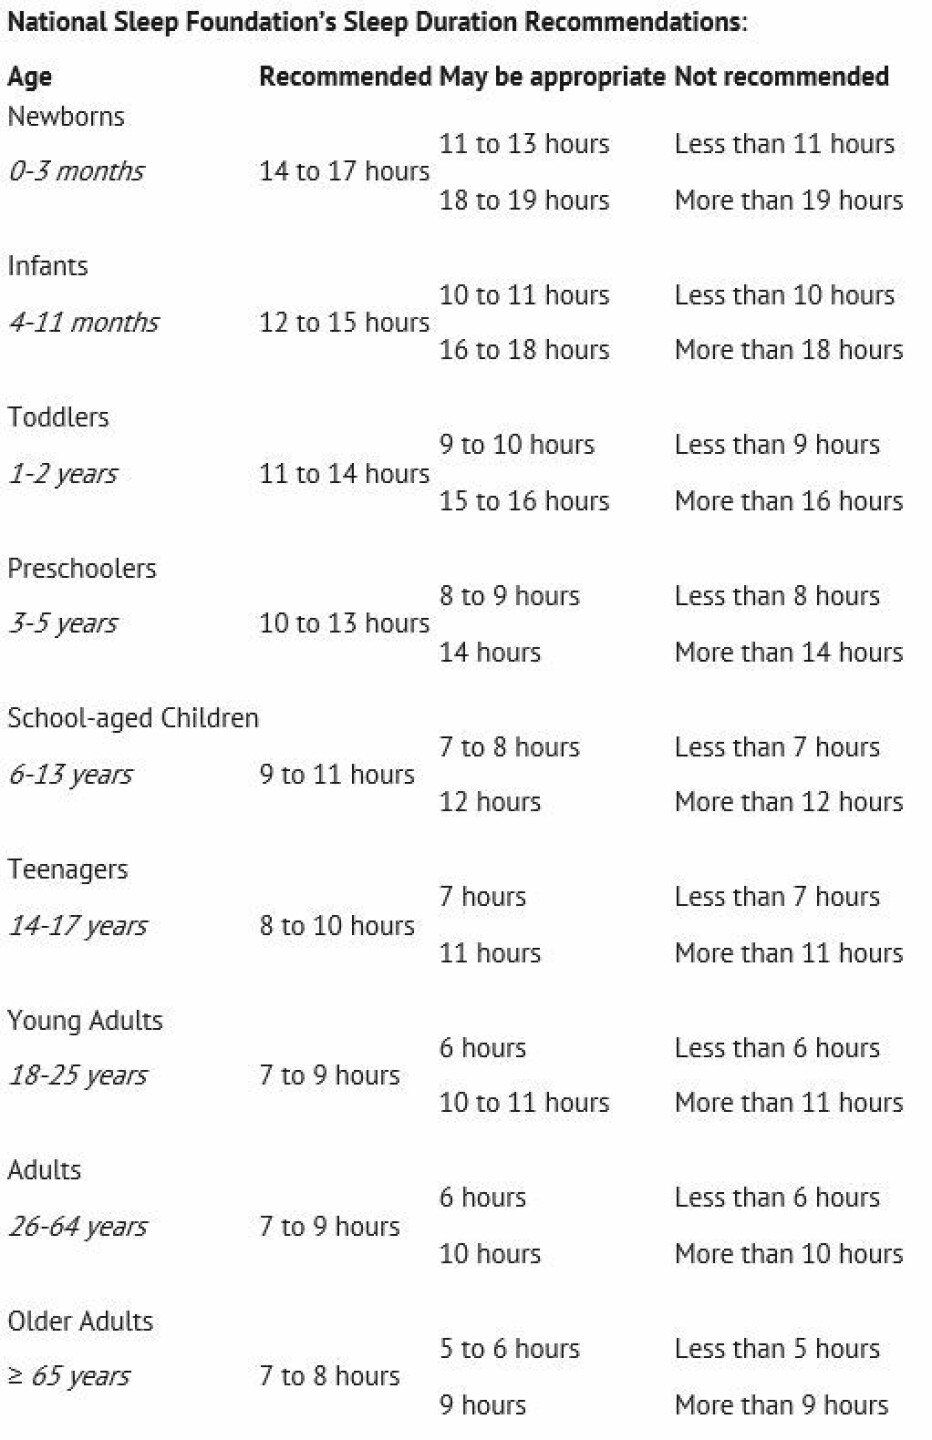 Recommended hours of sleep for different age groups. Click on the table to make it larger.